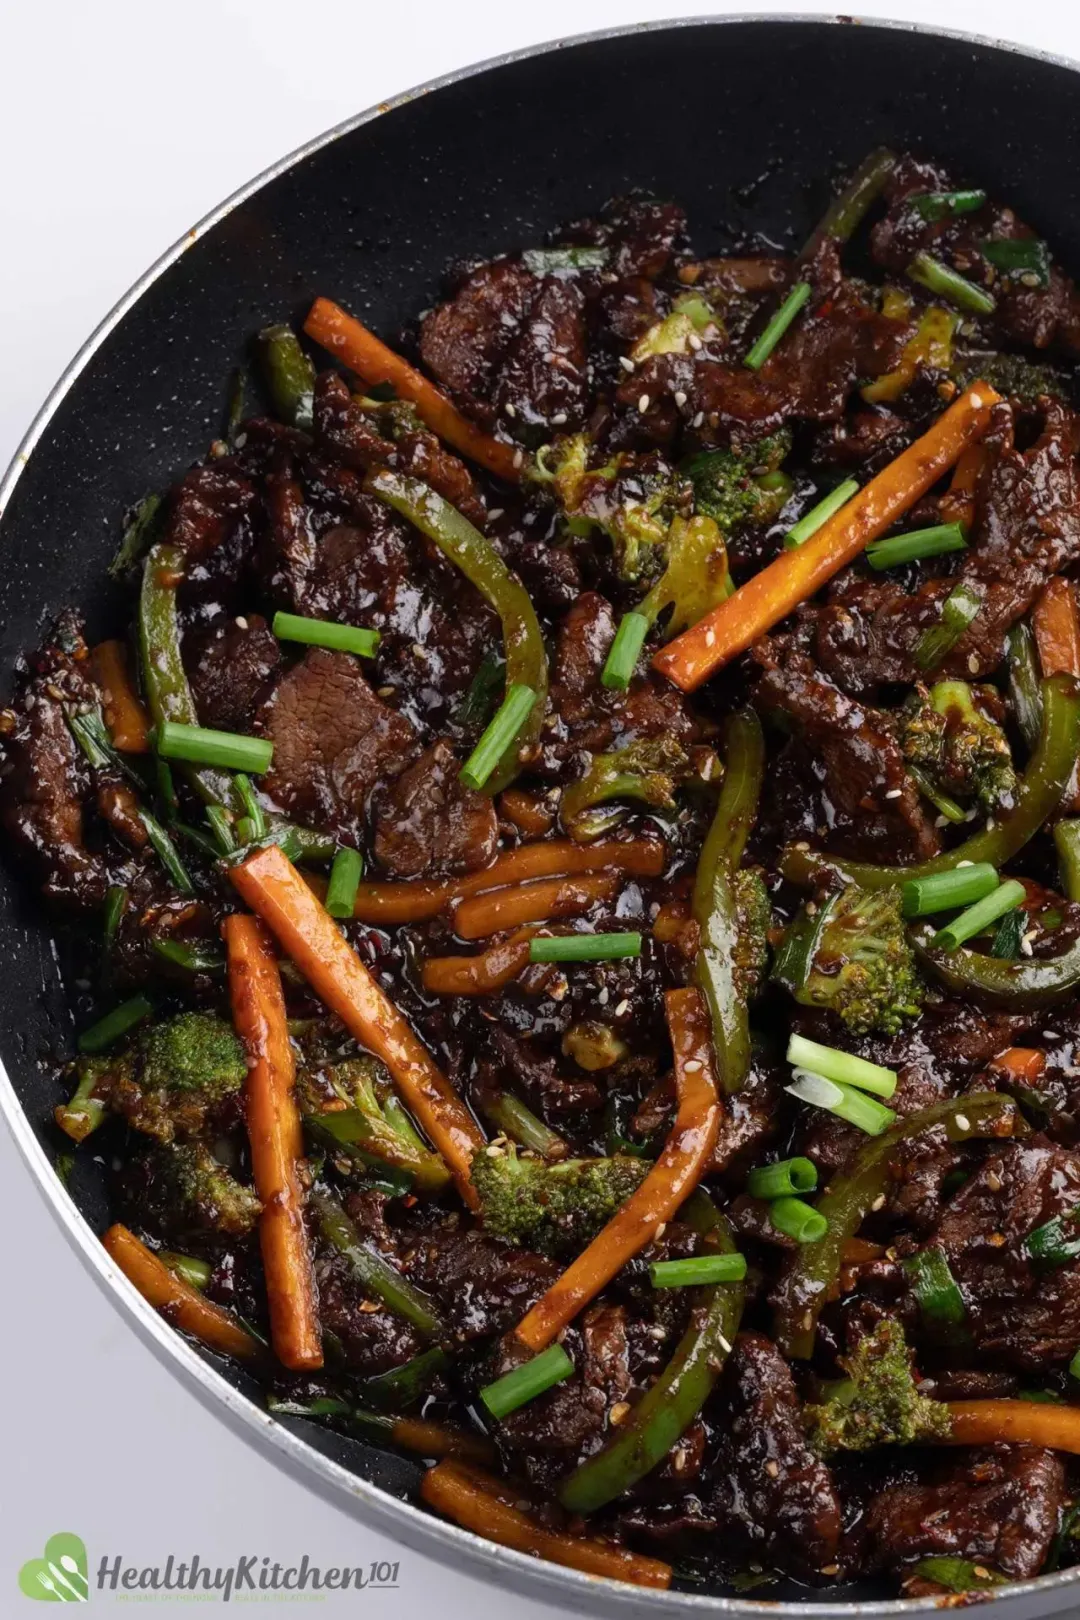 Tips for Making Mongolian Beef